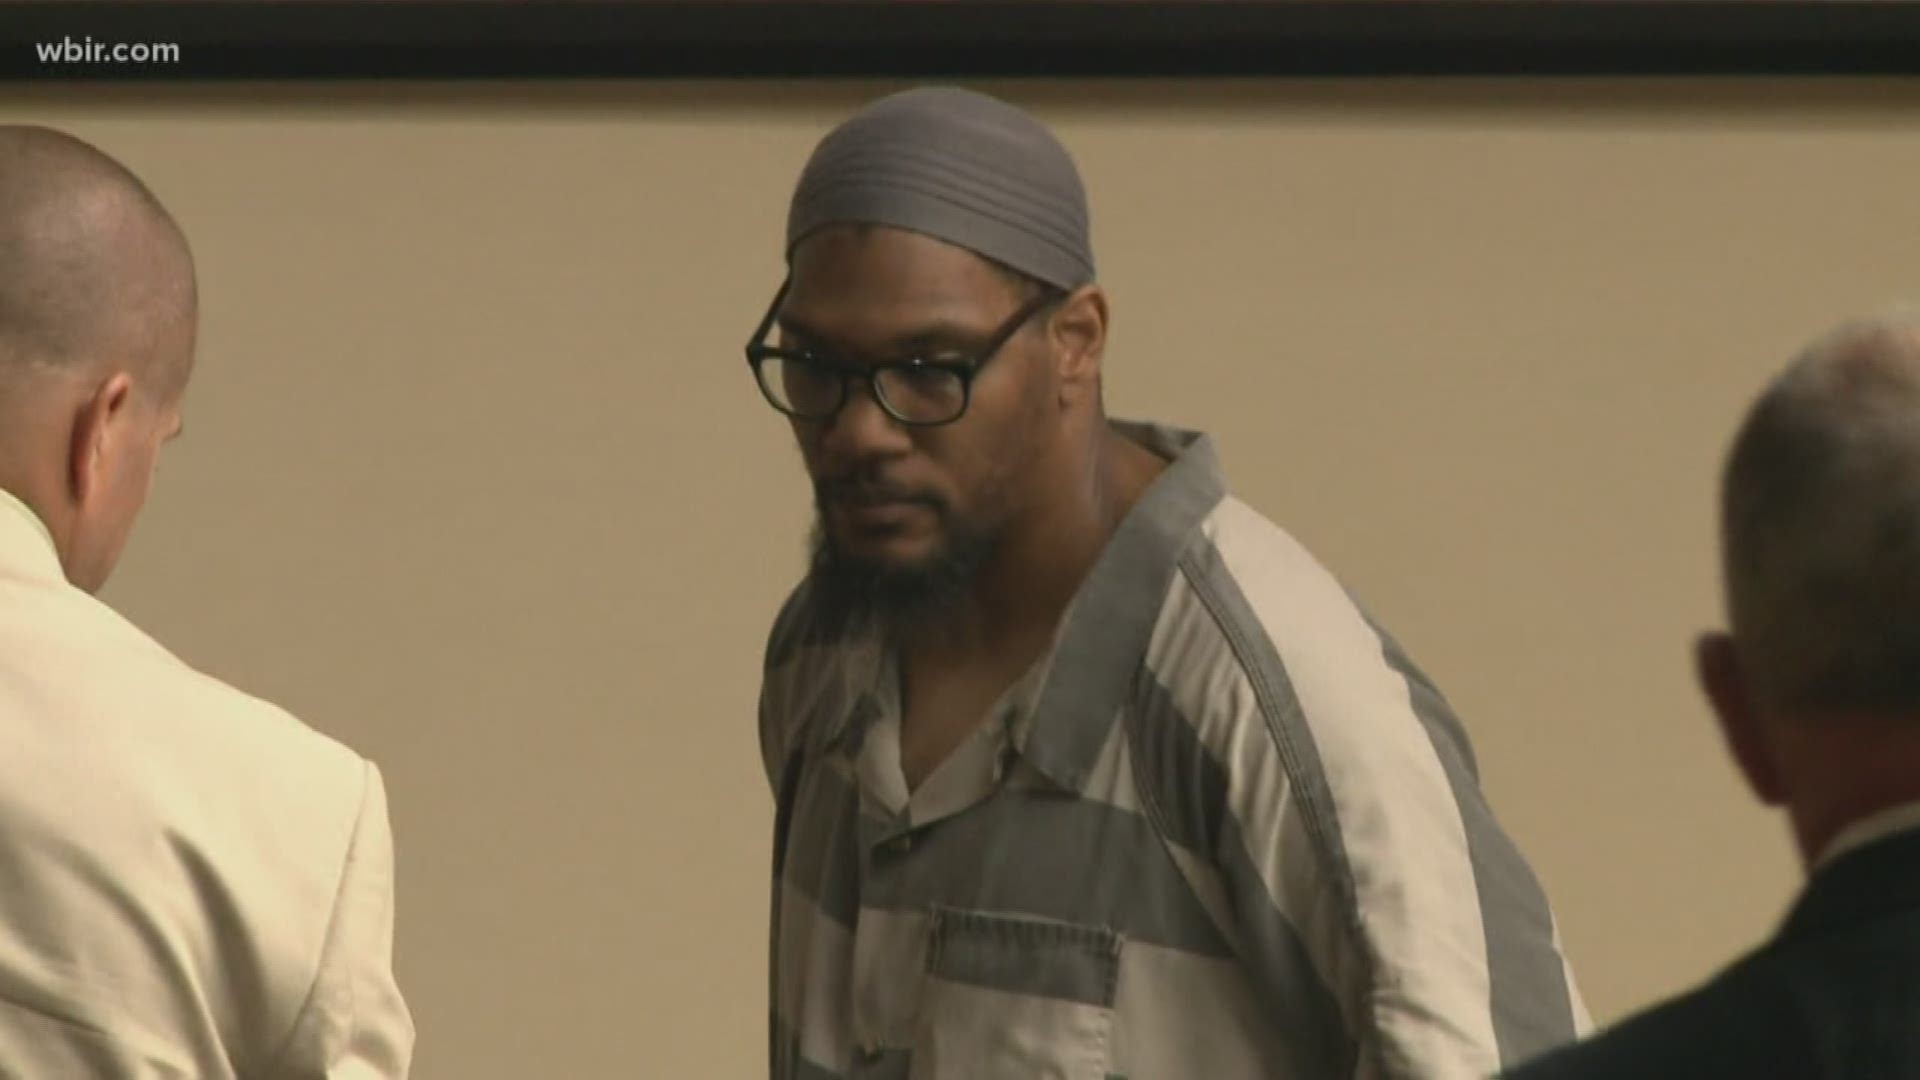 A judge will once again consider shortening the sentence of convicted killer George Thomas on Monday.